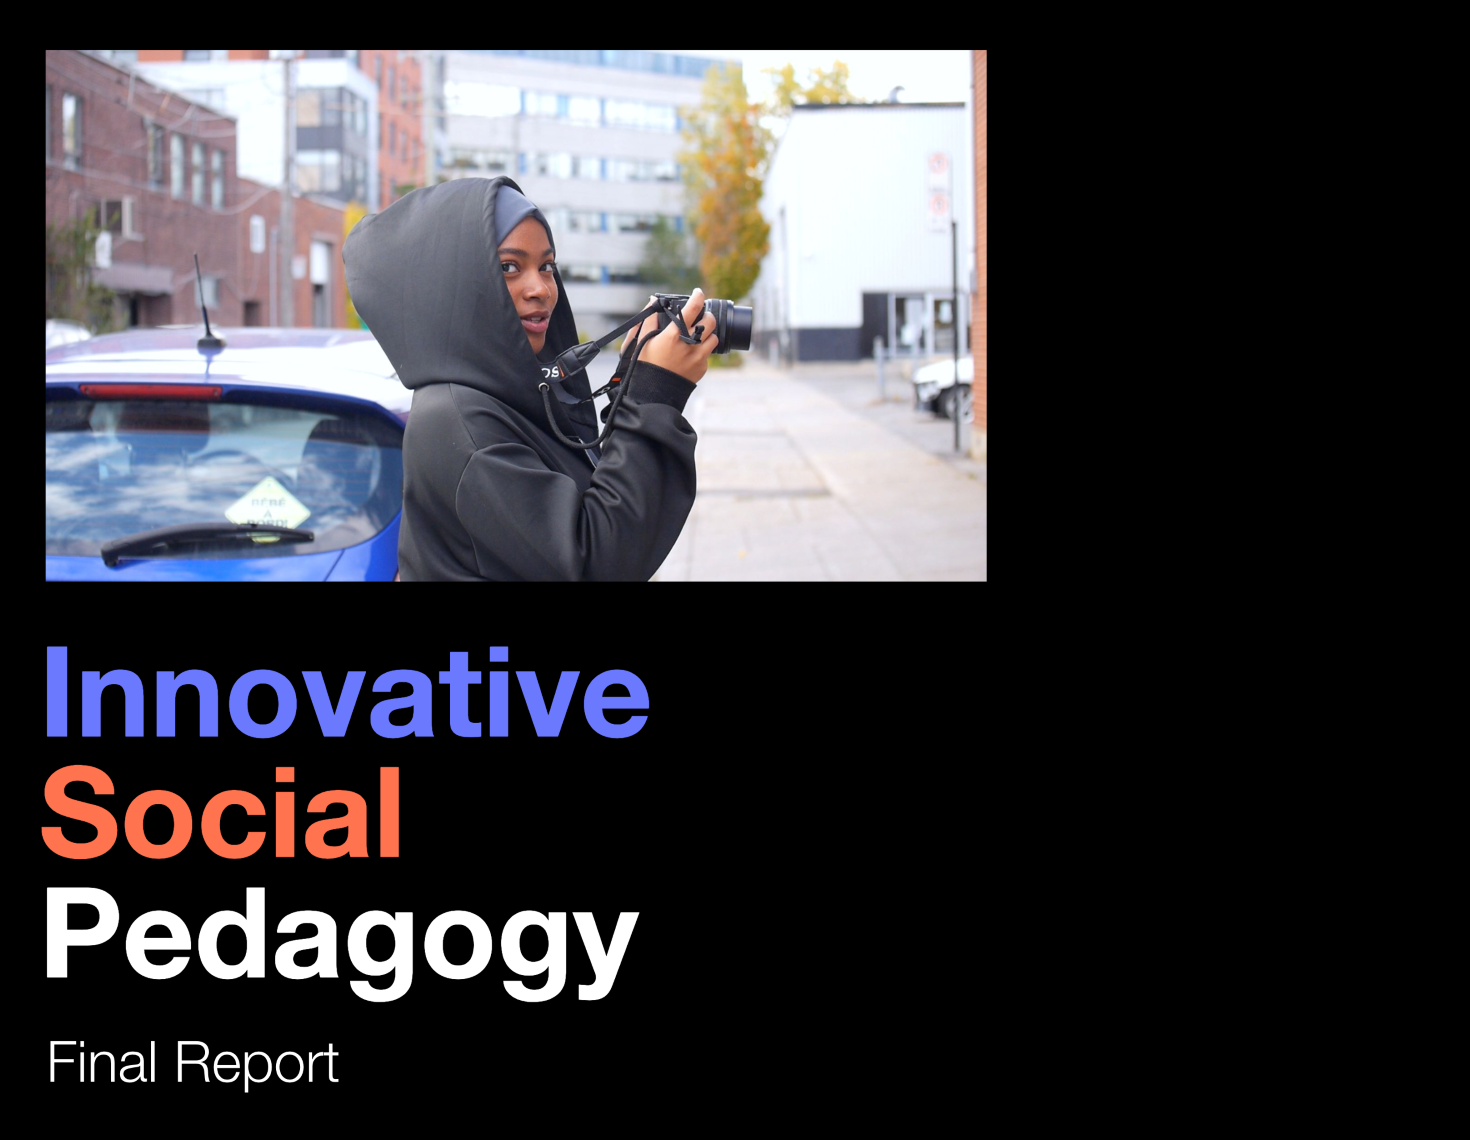 The Innovative Social Pedagogy project releases its third and final policy brief